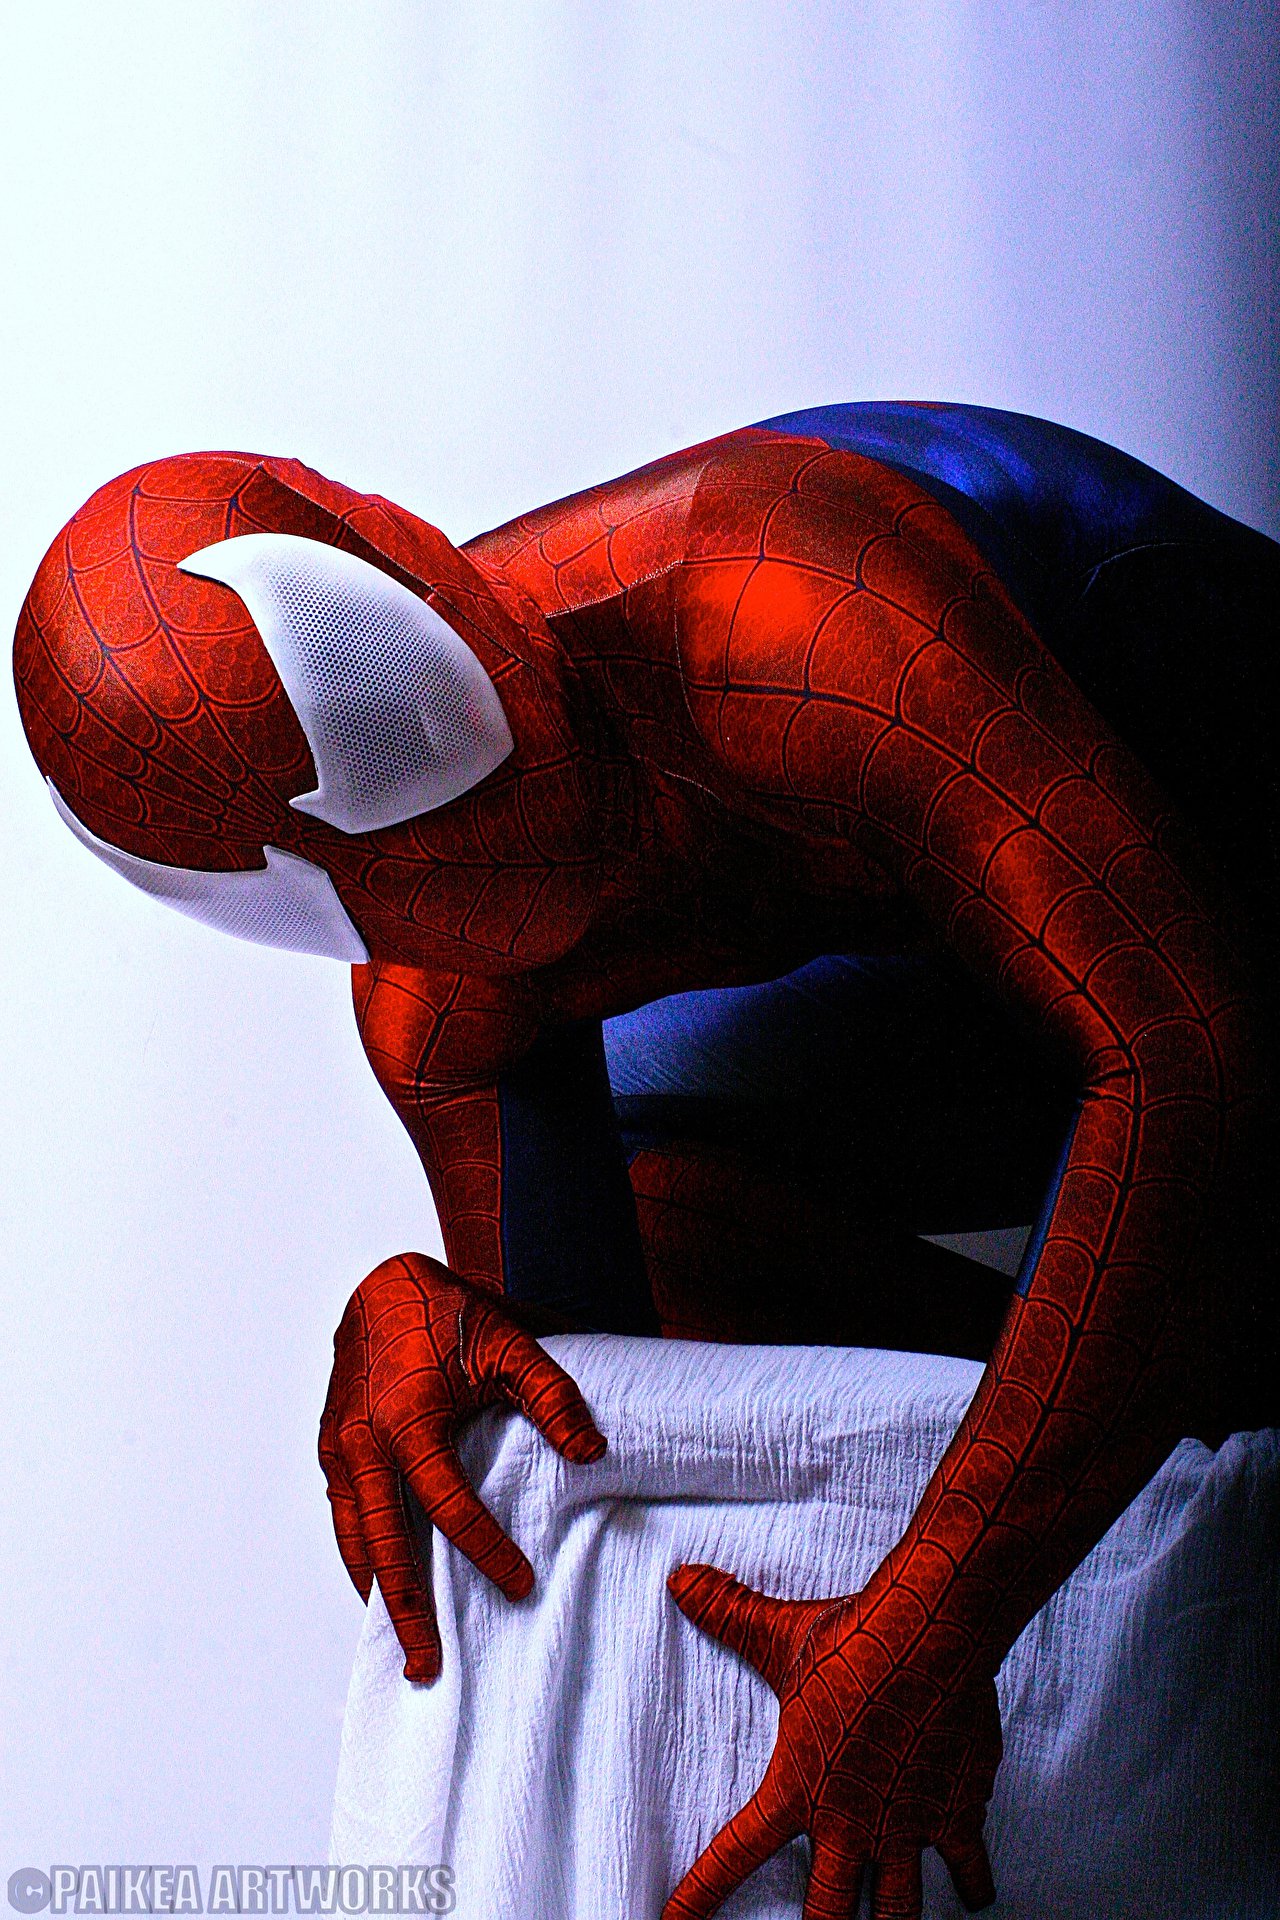 Cospix.net photo featuring Asian Heritage Spidey